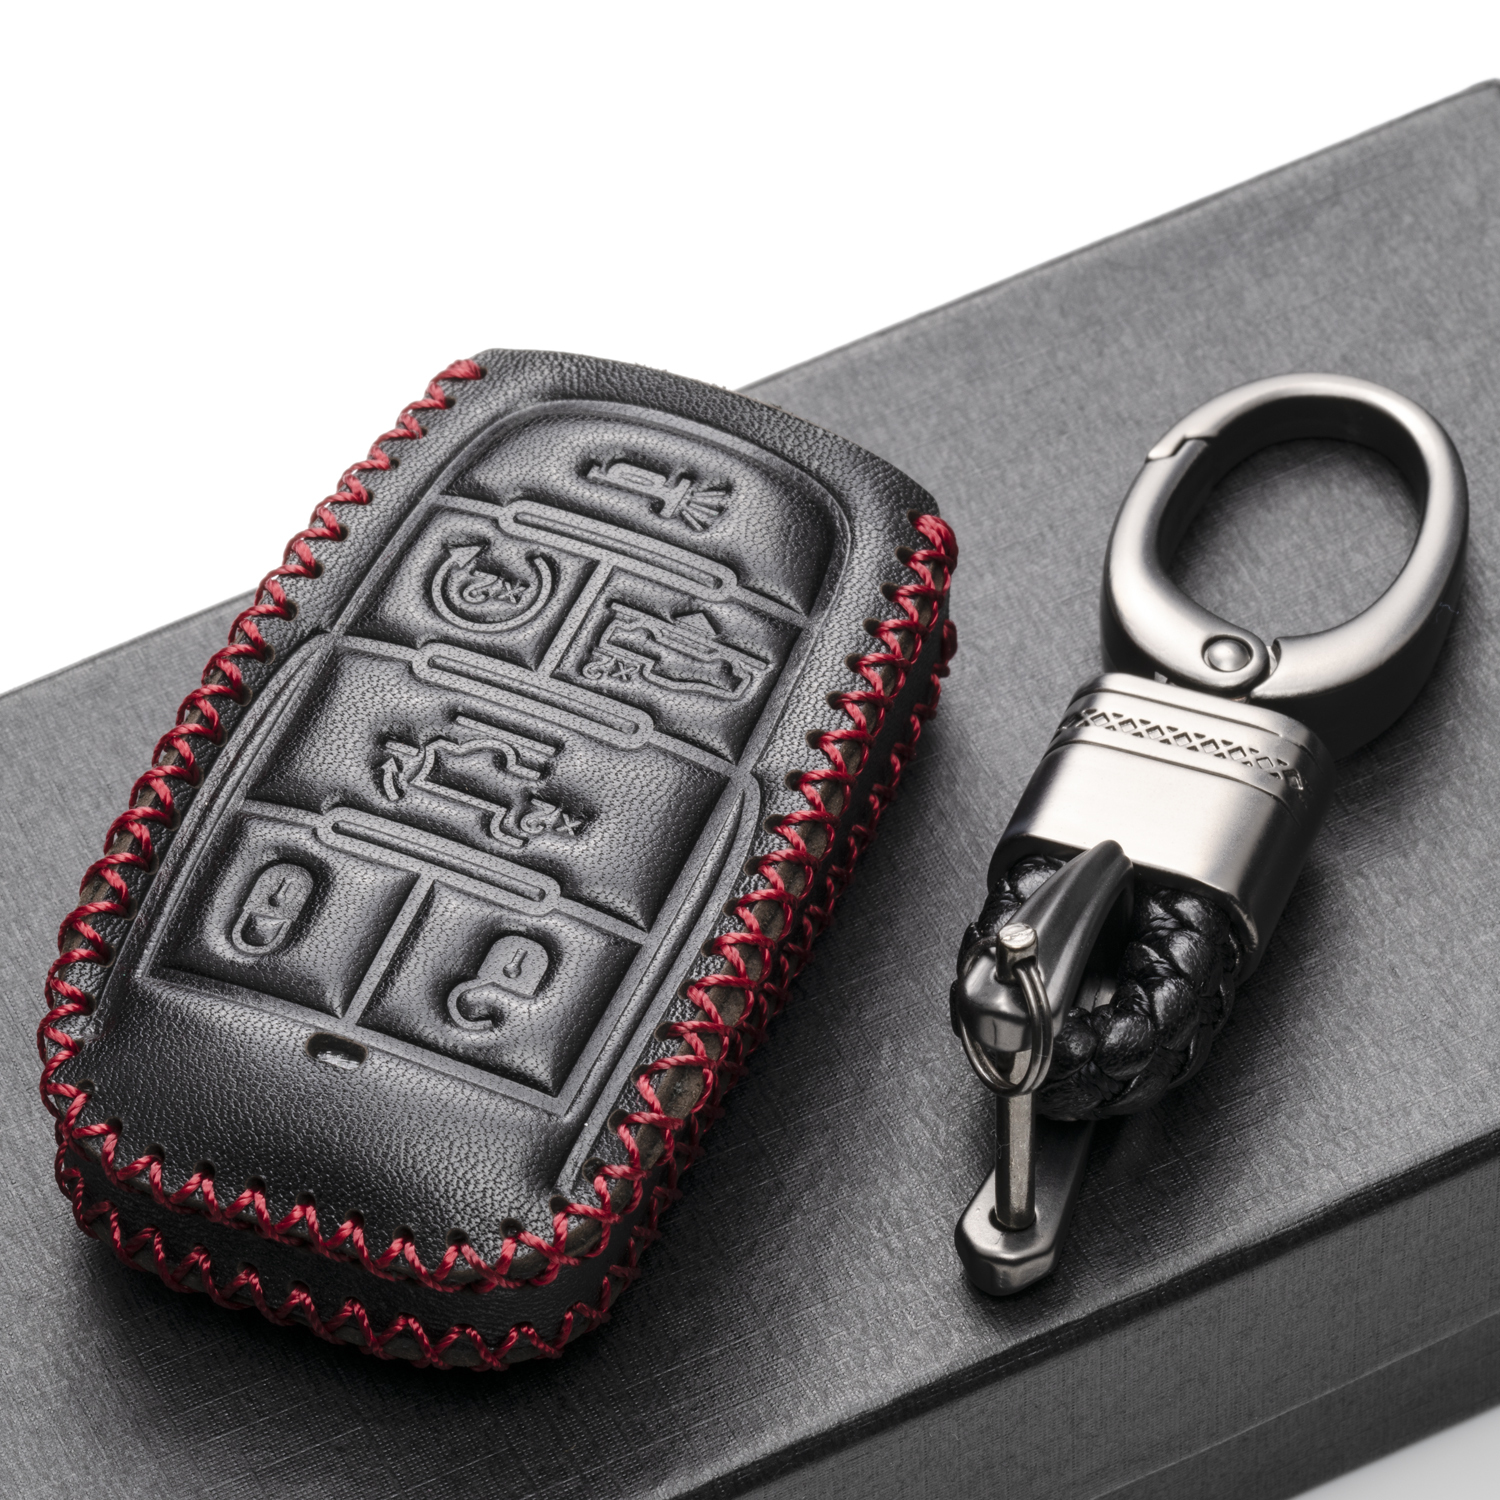 4 Buttons, Red Vitodeco Genuine Leather Smart Key Keyless Remote Entry Fob Case Cover with Leather Key Chain for BMW 1 2 5 7 M Series X1 X4 X5 X6